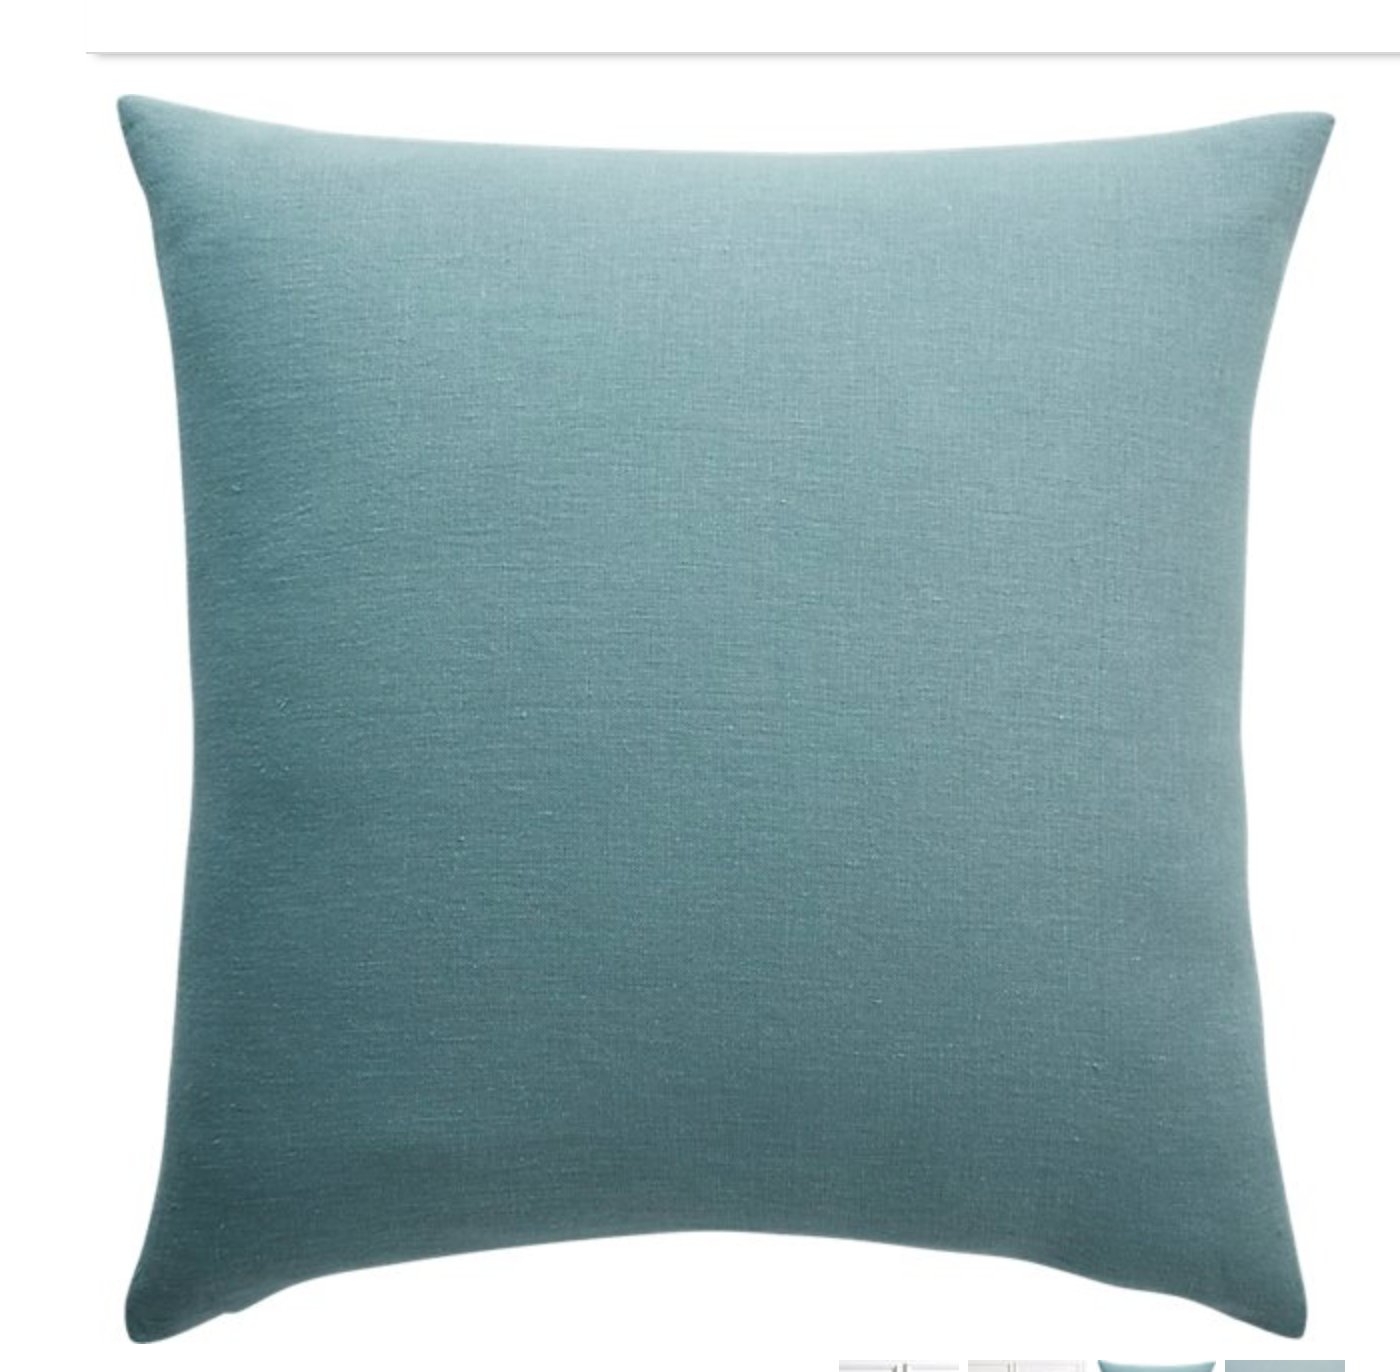 20" LINEN ARCTIC BLUE PILLOW WITH FEATHER-DOWN INSERT - Image 0